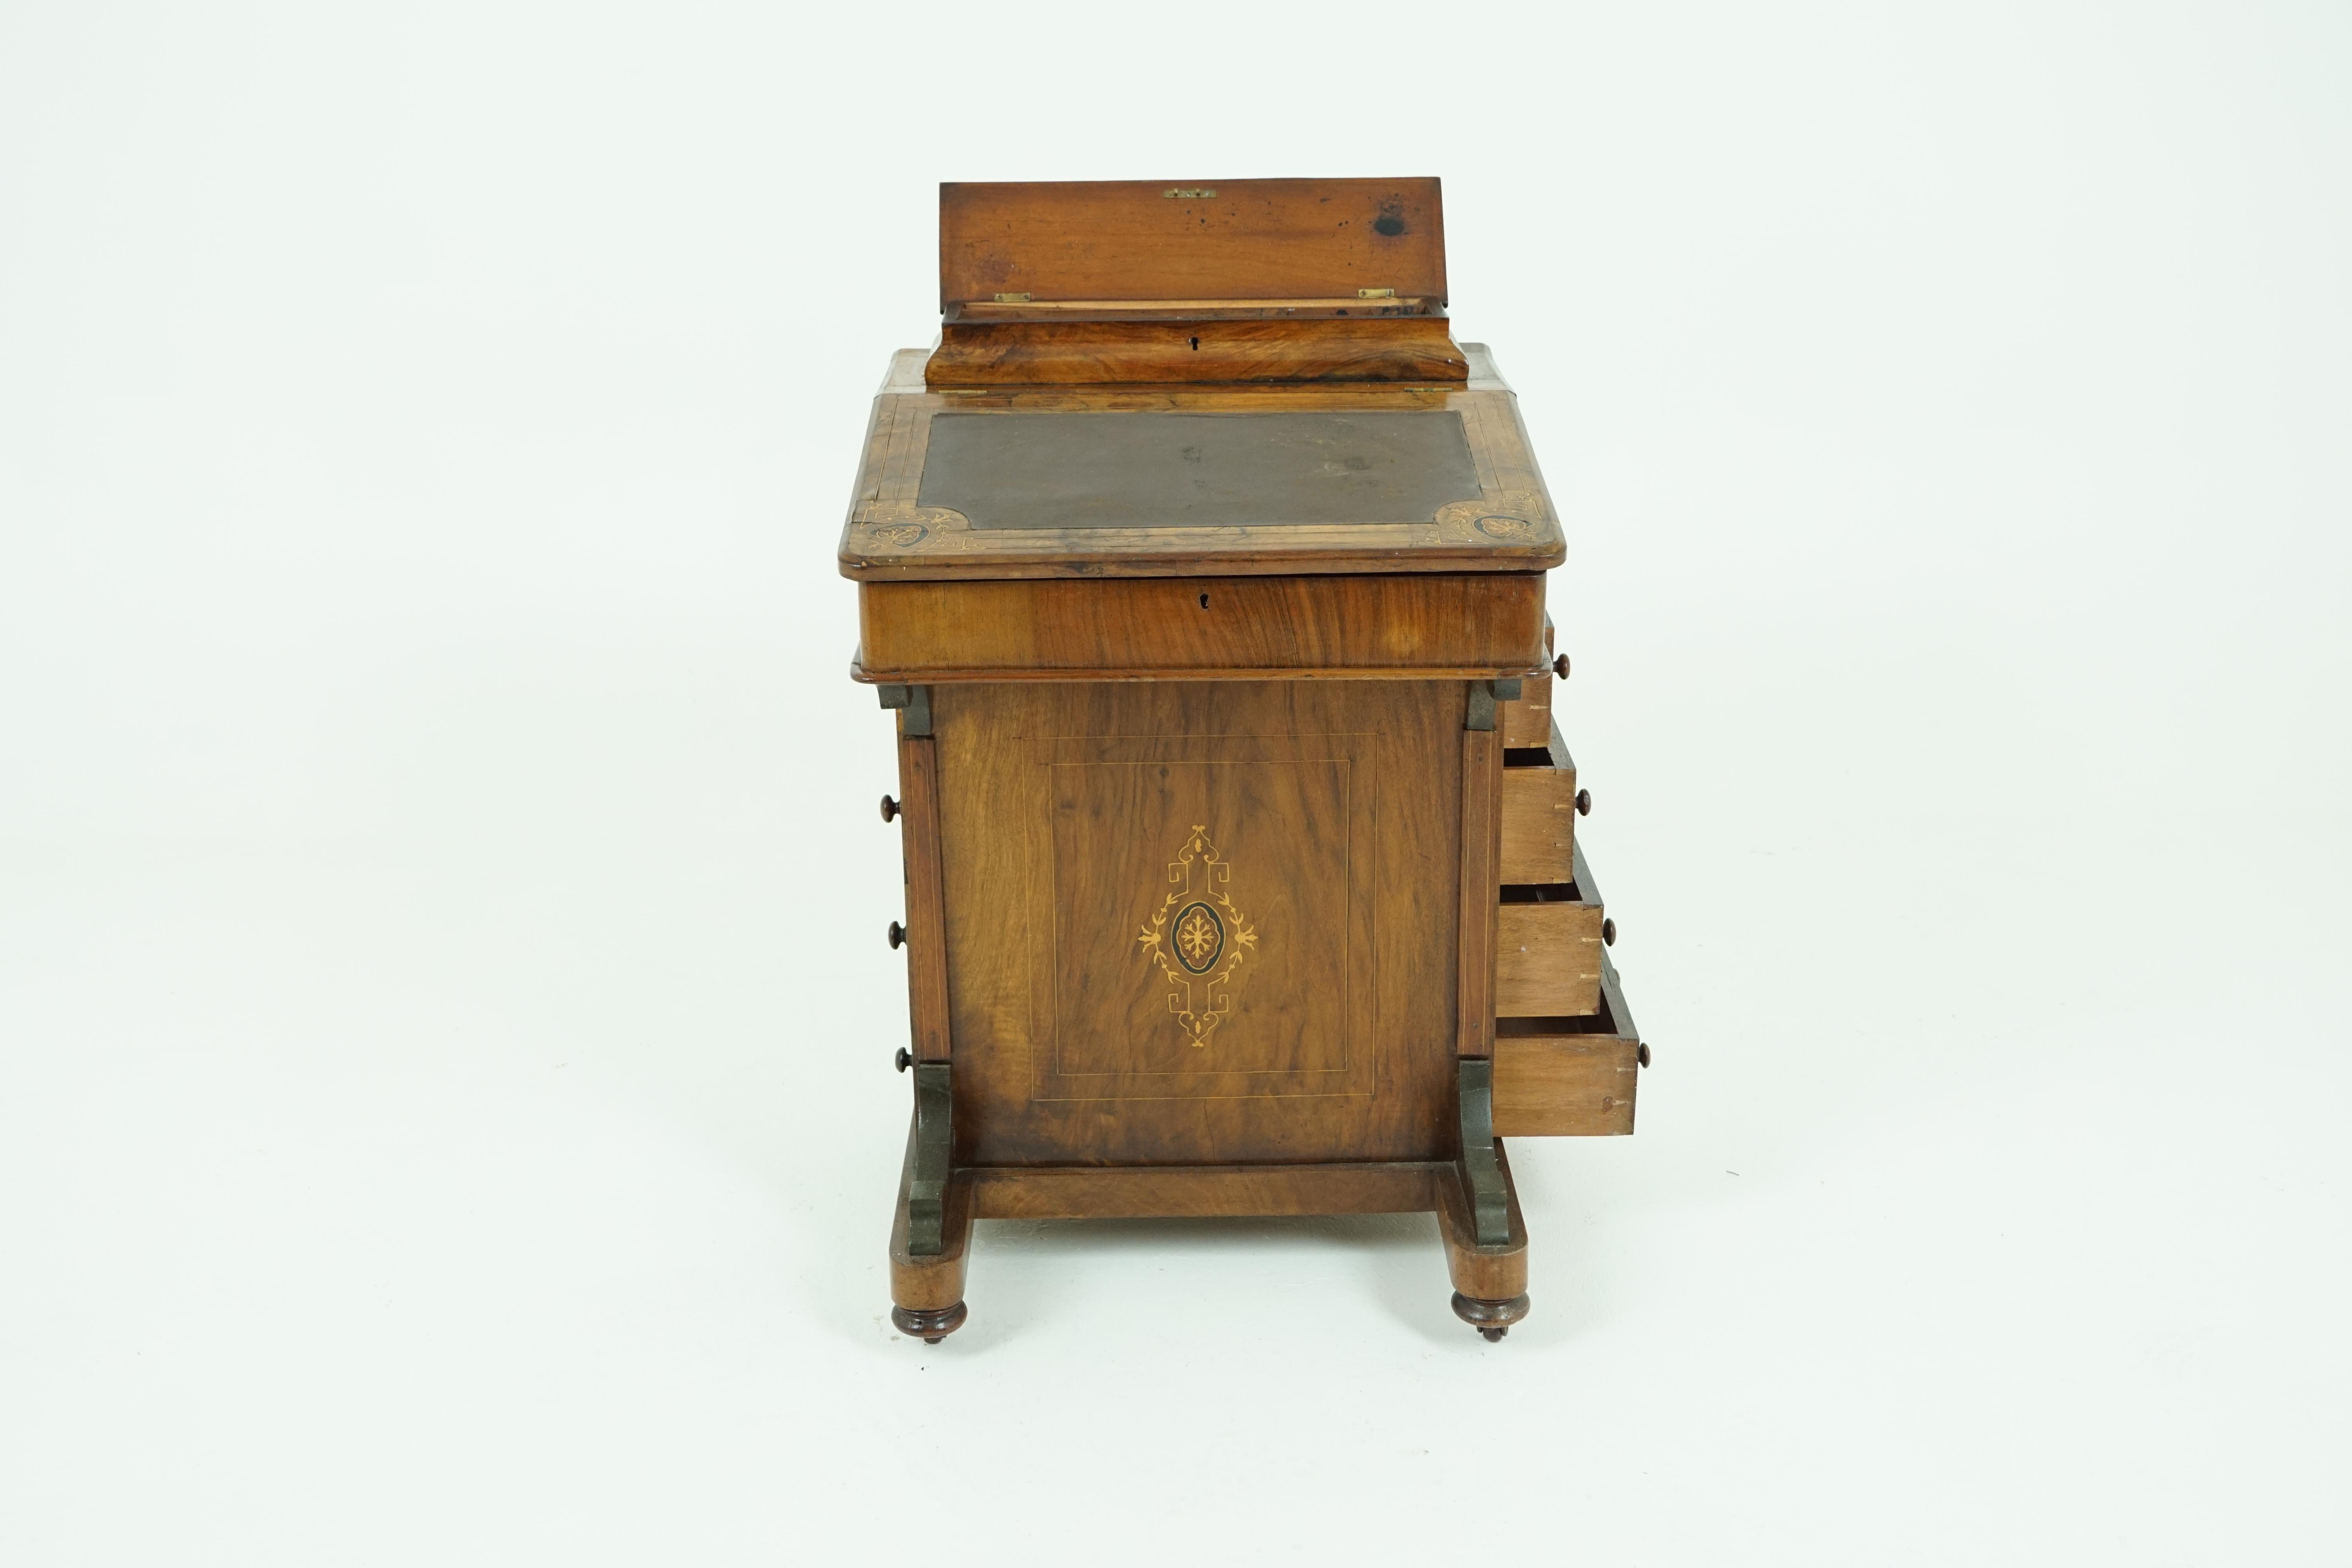 Scotland 1870
Solid walnut and Veneers
Inlaid lift top with storage space beneath
Brown leather insert at the top
Opens to reveal pigeon holes
Inkwell holders
Some scuff to the back of lid
Four dovetailed drawers with original knobs to the